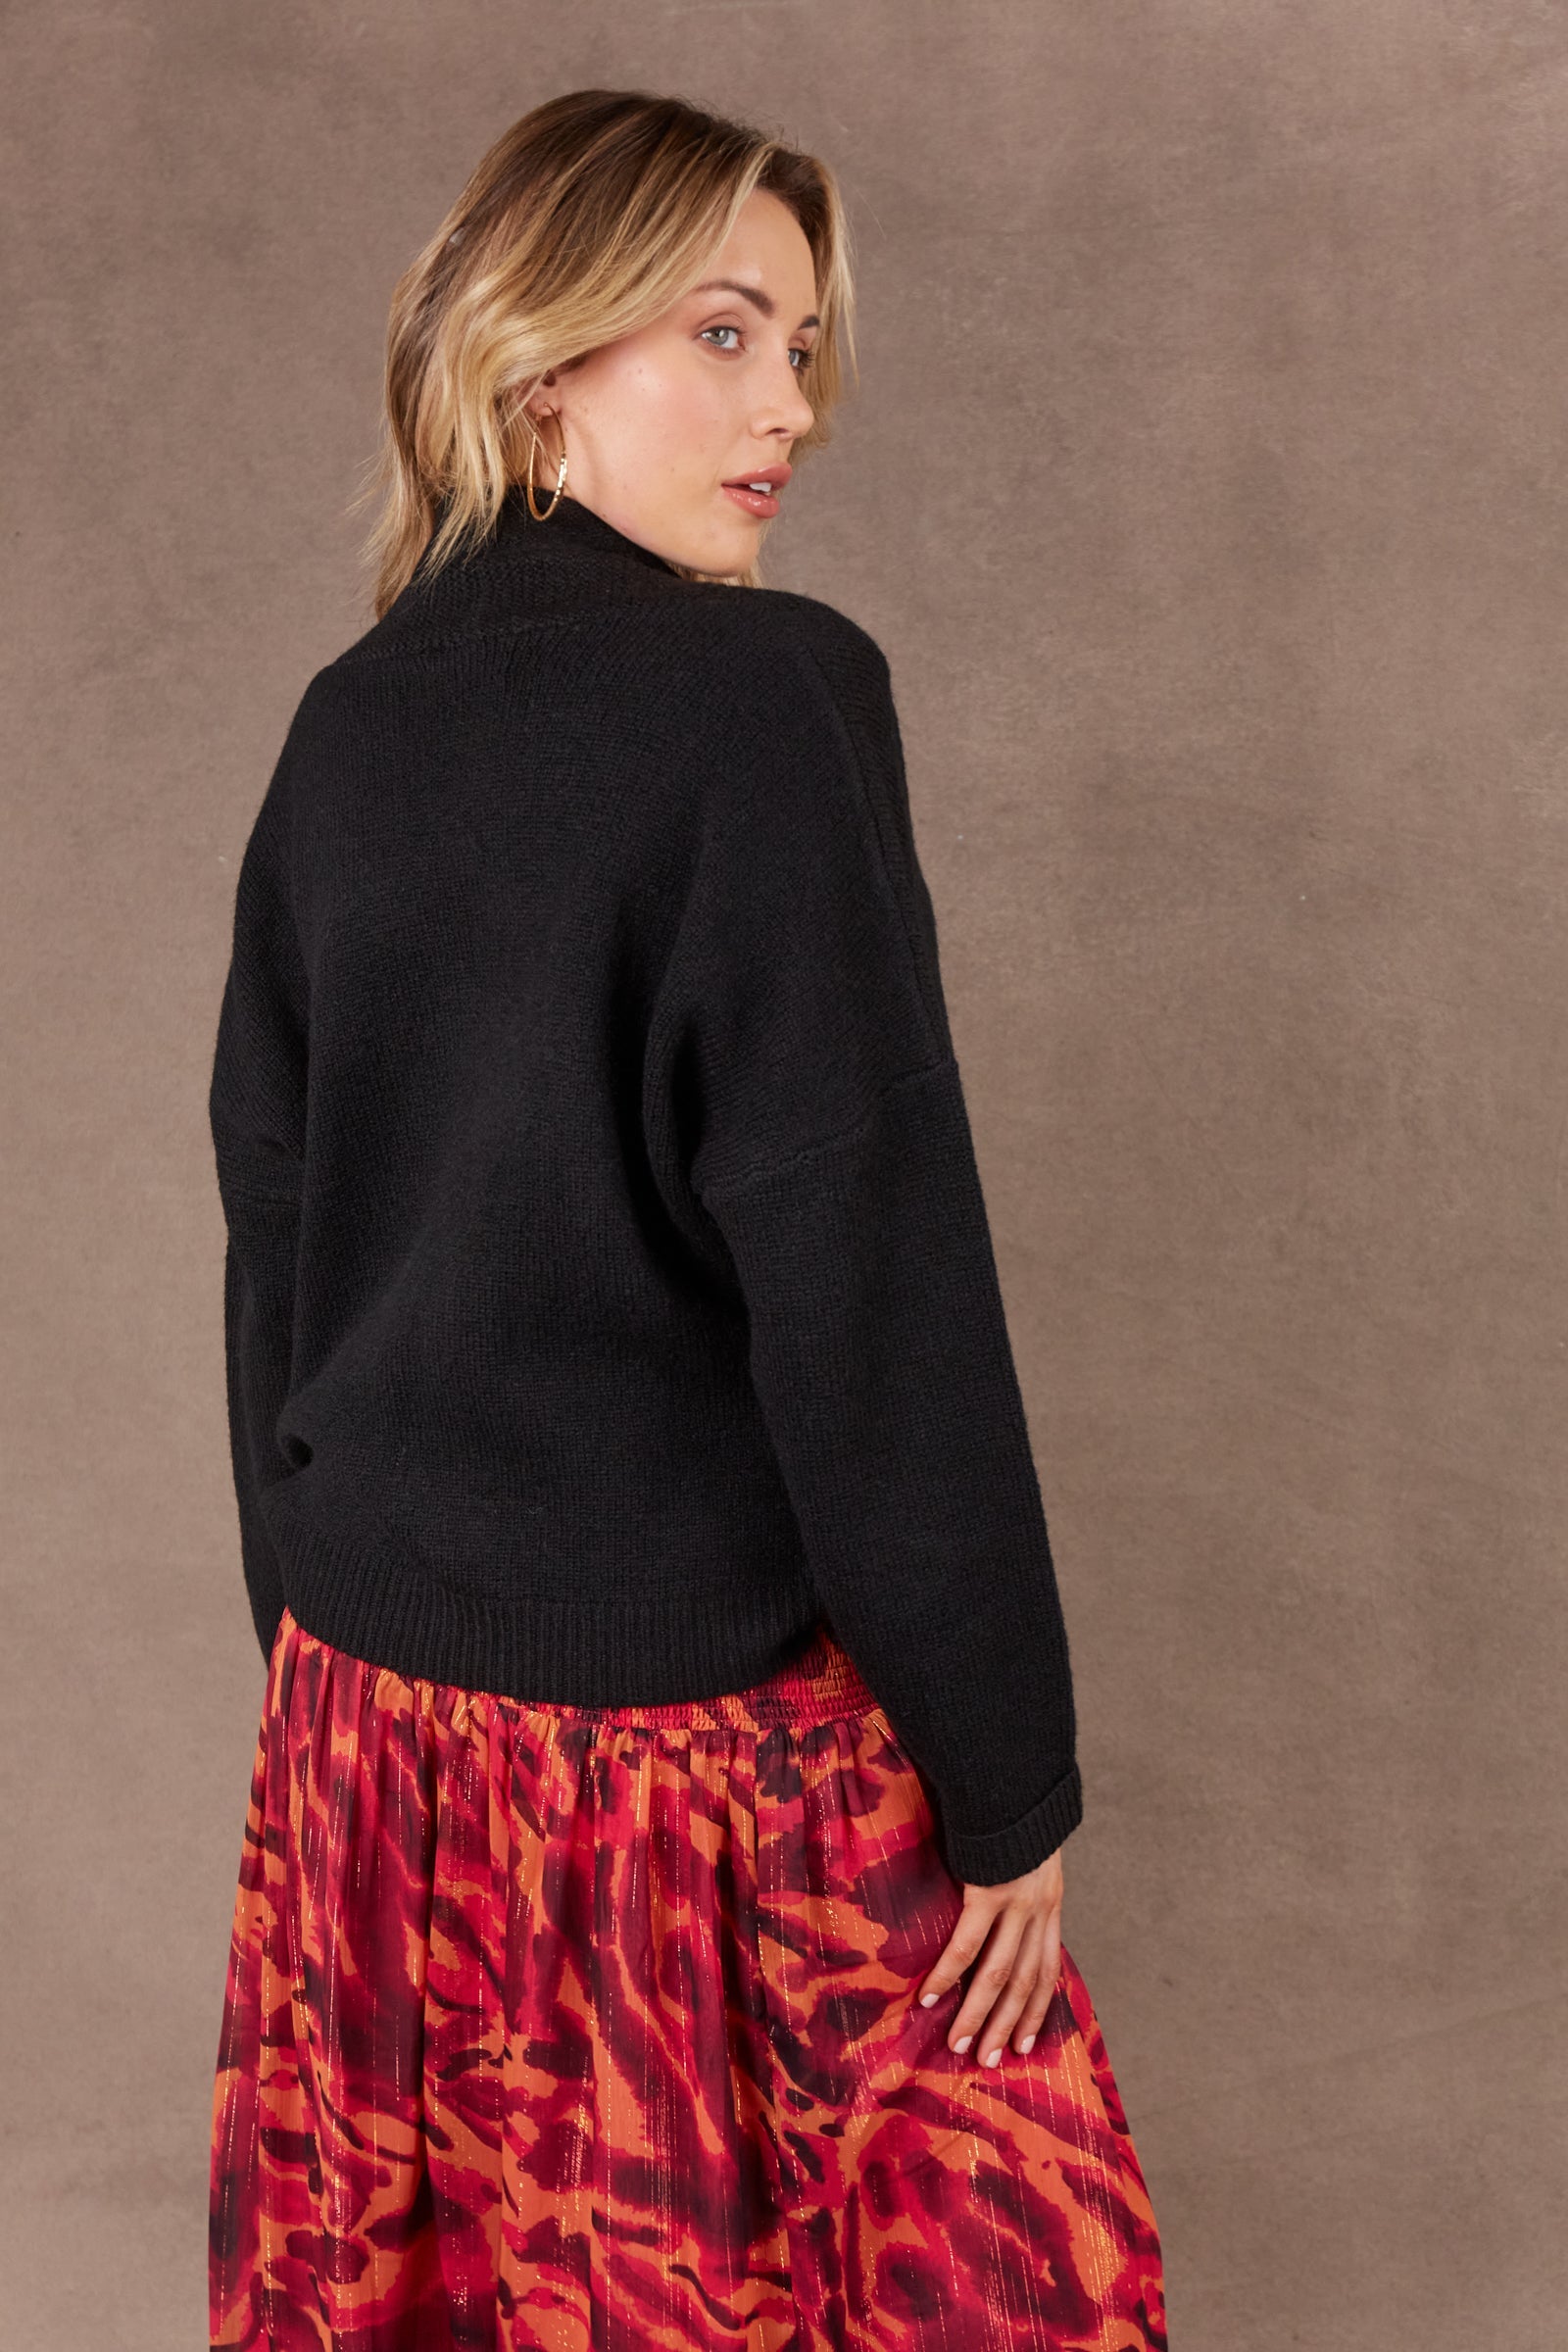 Paarl Crossover Knit - Ebony-Knitwear & Jumpers-Eb & Ive-The Bay Room